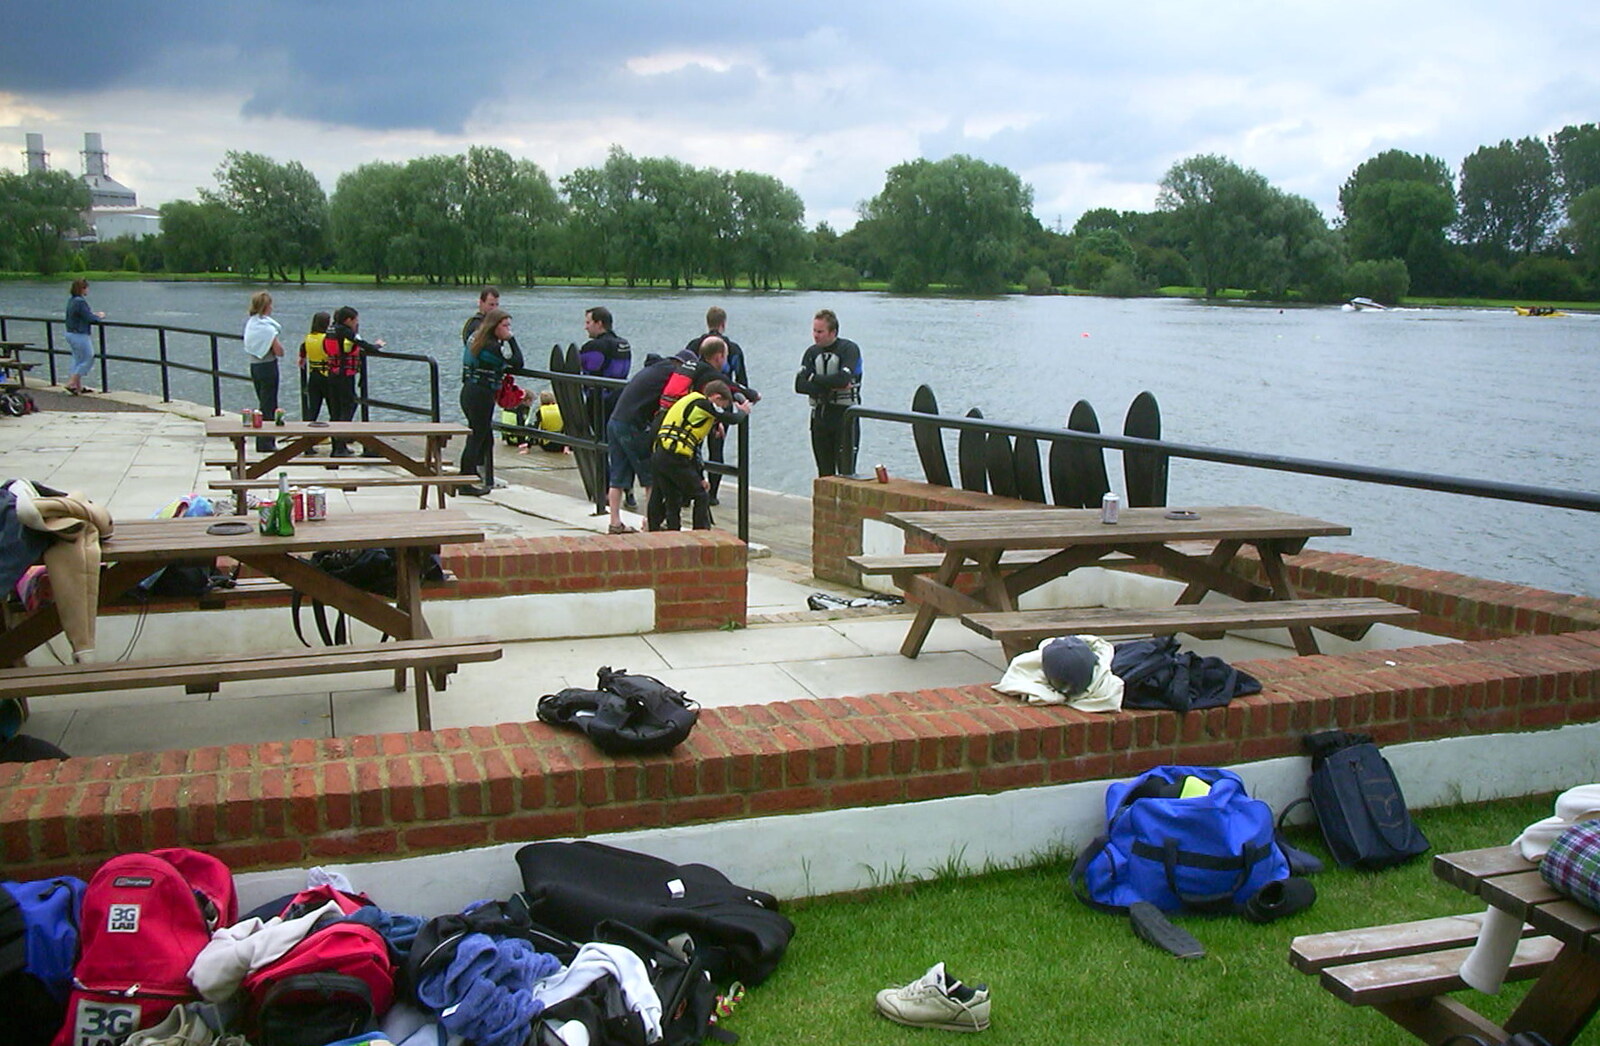 3G Lab Watersports Fun Day, Wyboston, Bedfordshire - 8th June 2002: The 3G Lab gang are hanging around